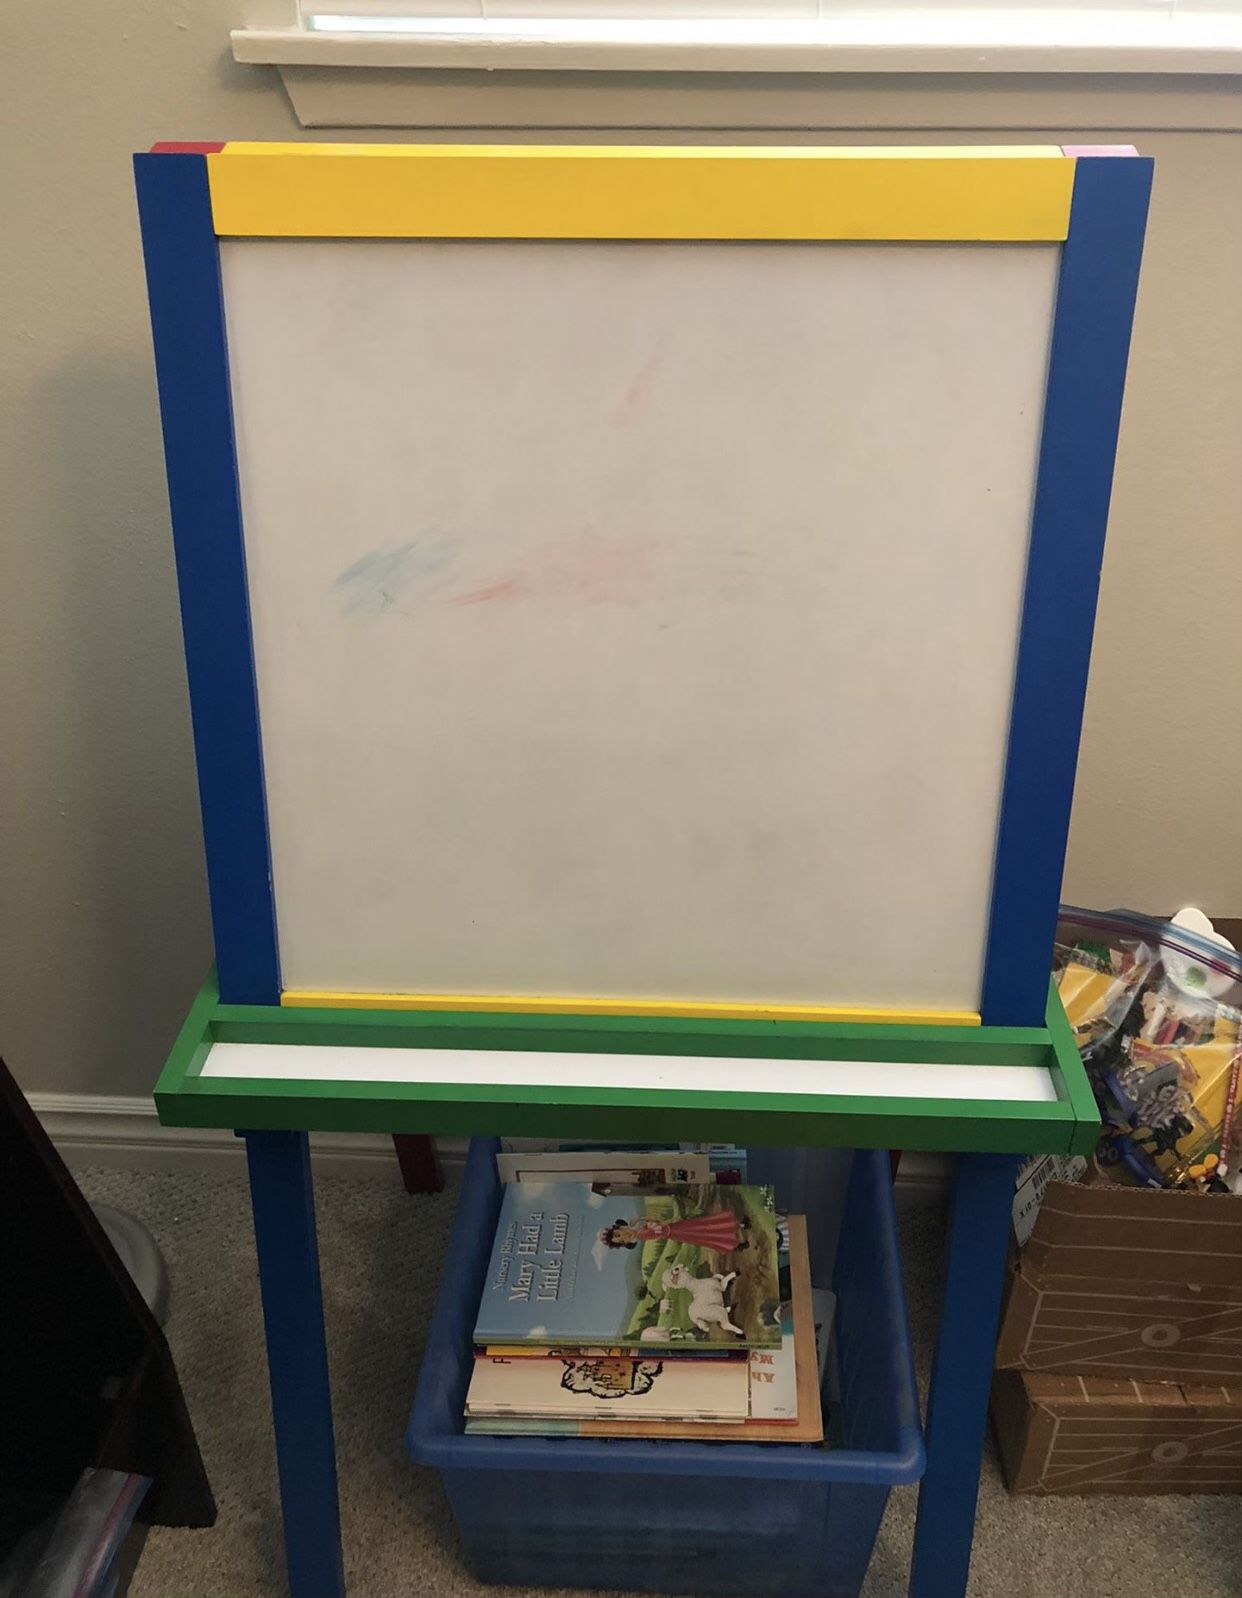 All-Purpose Mobile Teaching Dry ERASE Easel - Elementary for Sale in Long  Beach, CA - OfferUp